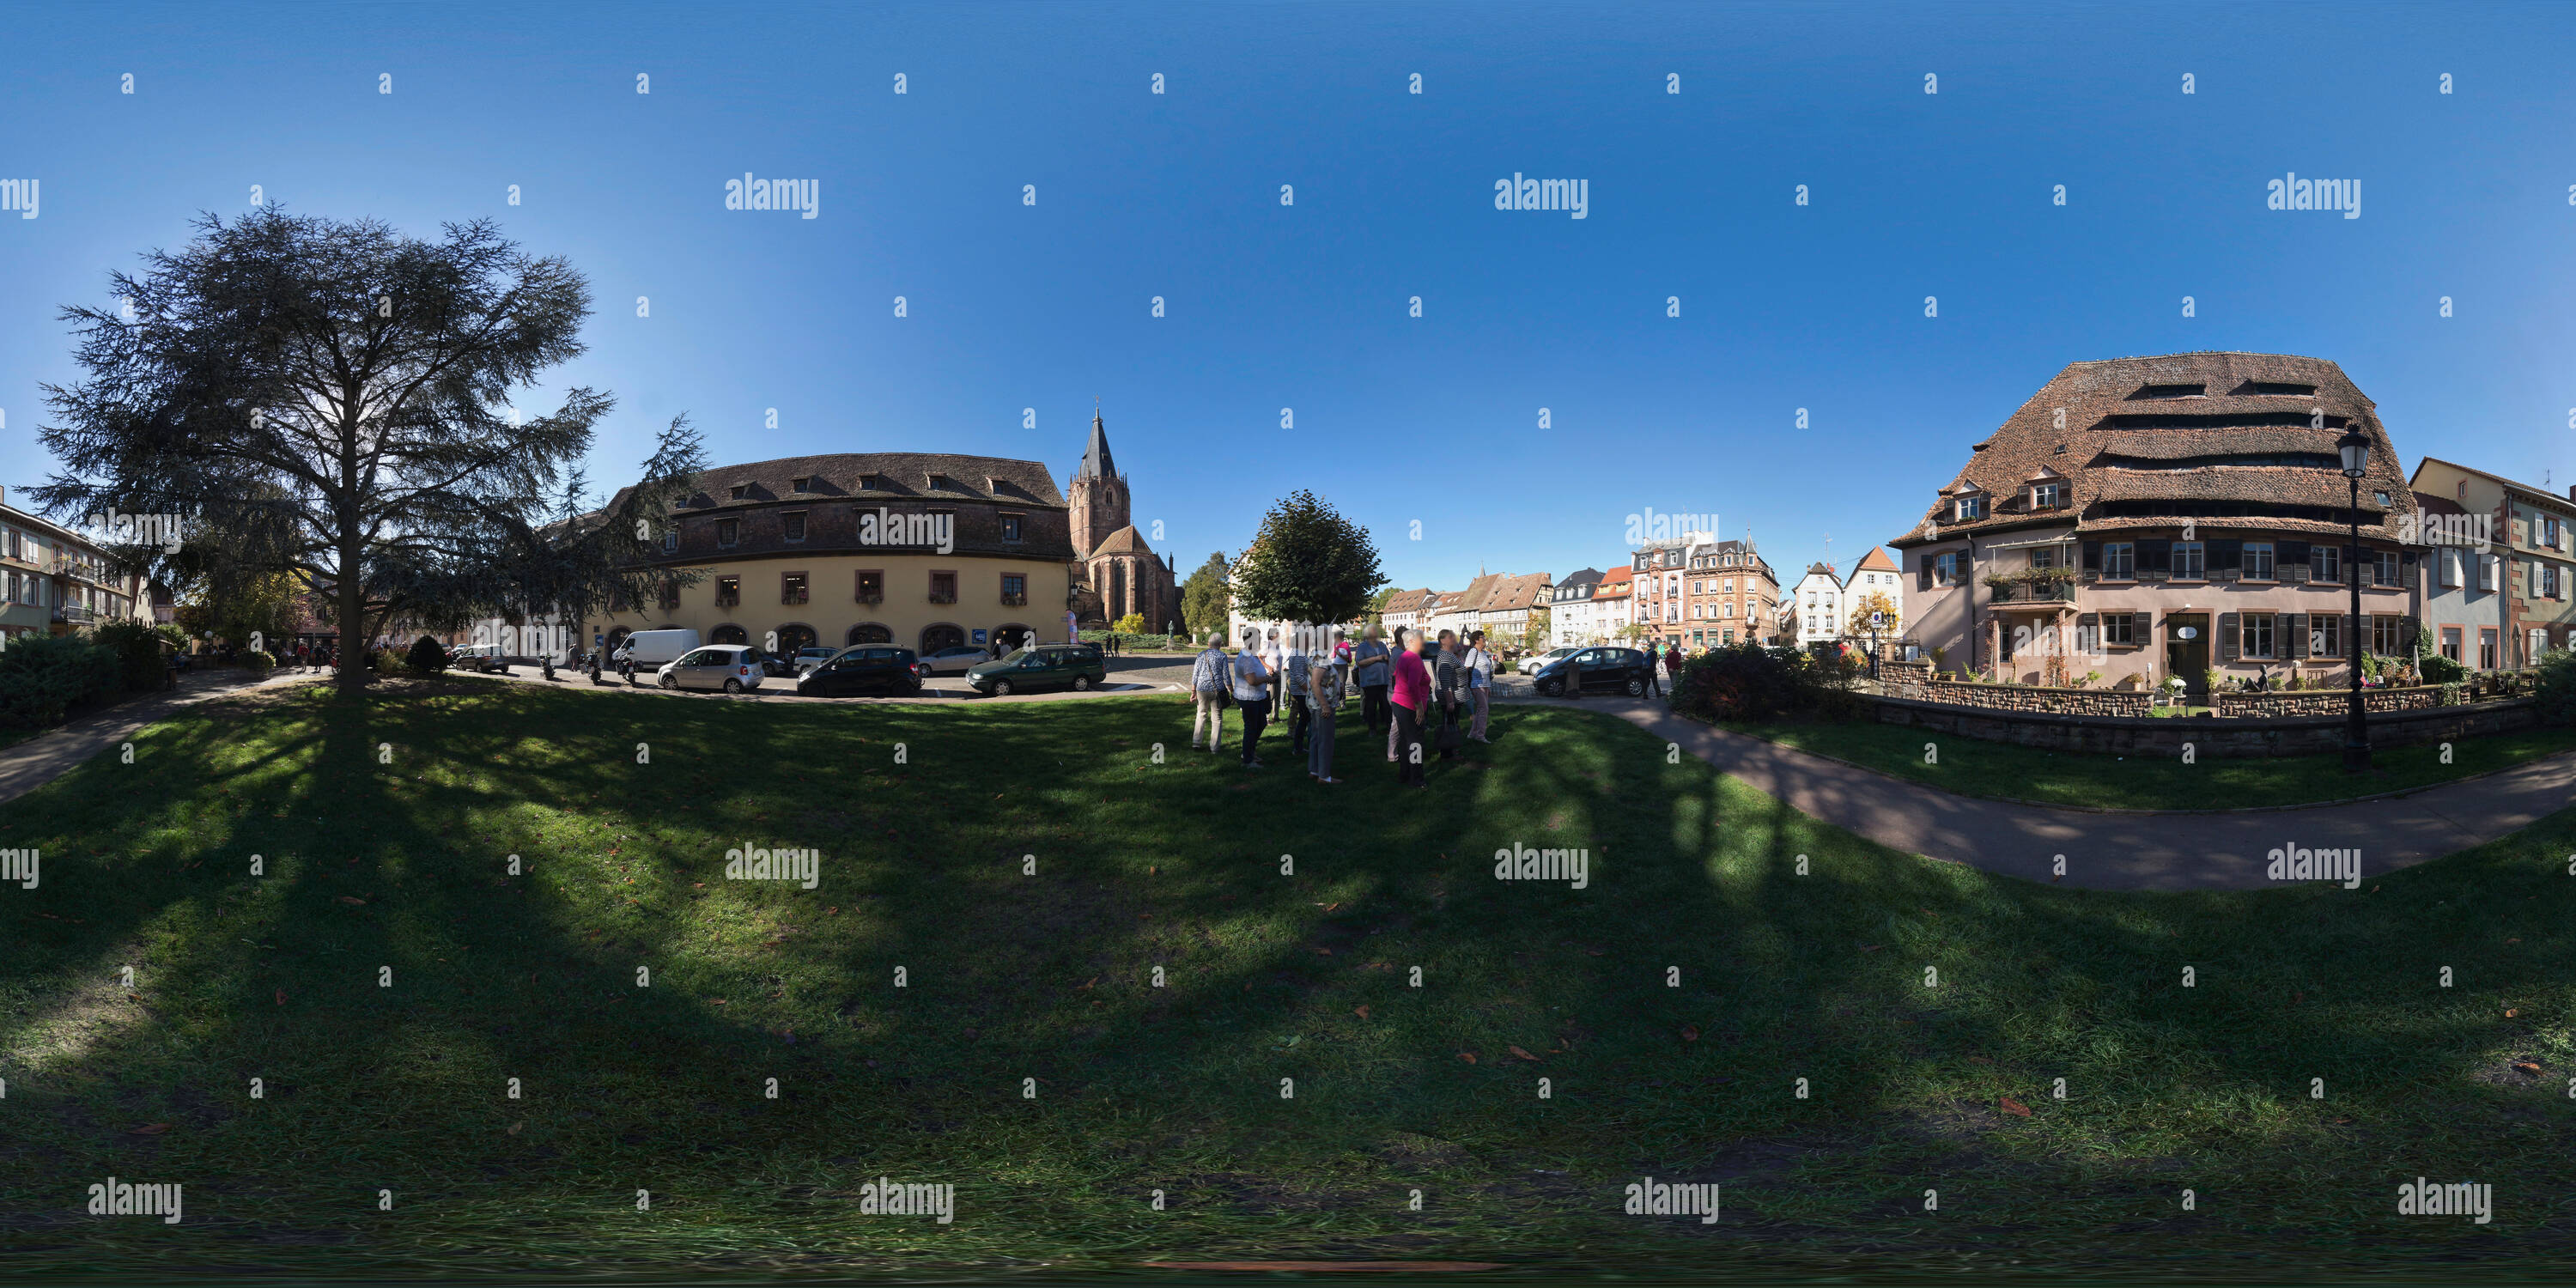 360 degree panoramic view of Wissembourg, Place du Saumon, Salzhaus (Salt House), 2017-10